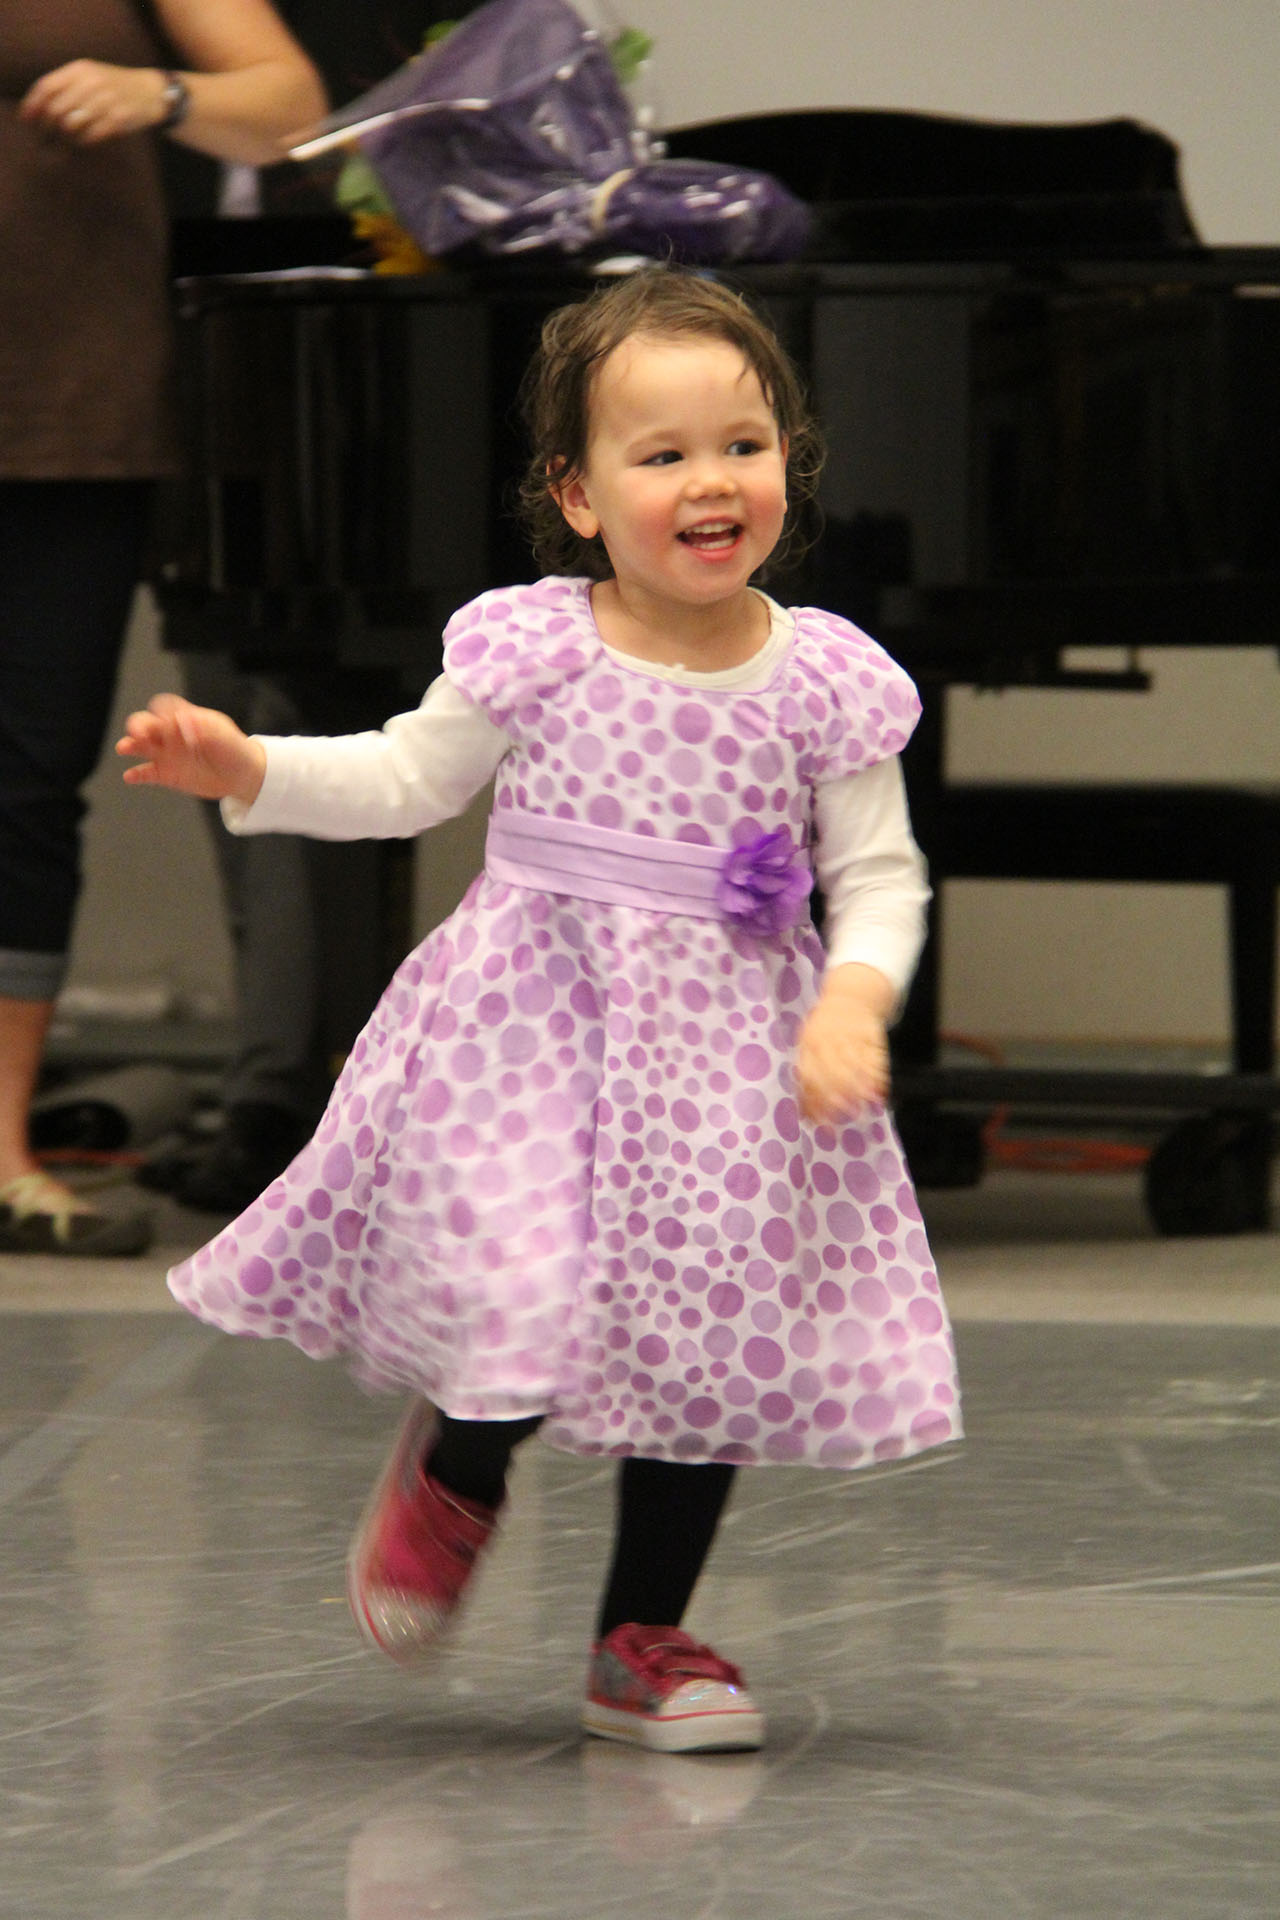 JUNE 2015: More than 60 talented young artists received $60,000 in awards at our annual Scholarship Night. Instructors recognized students of all ages, ranging from four-year-old Madeline Graham (pictured), who twirled her way to the stage, to dance graduates pursuing professional careers. “It helps make an art form we’ve worked on for 18 years possible,” said dancer Haley Heckethorn, who received an RBC Award.